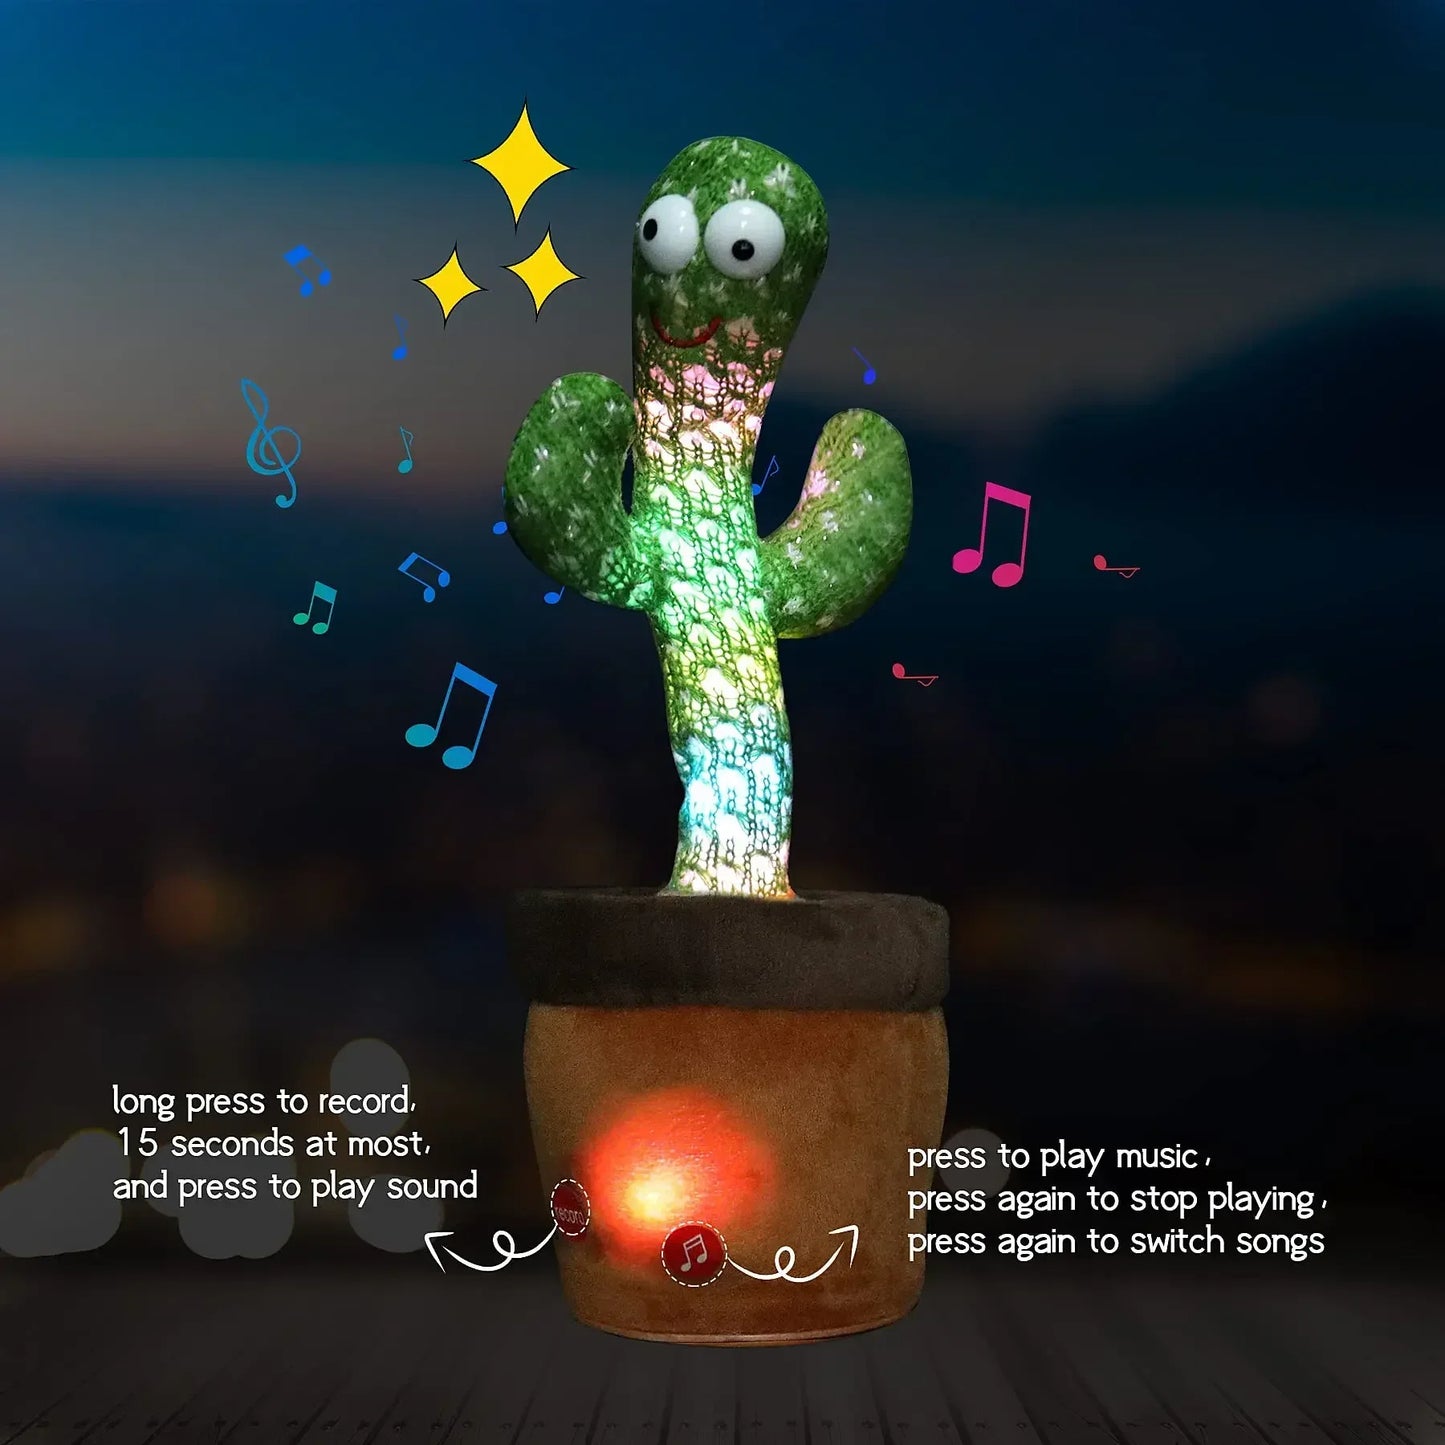 Rechargeable Dancing Cactus Toy